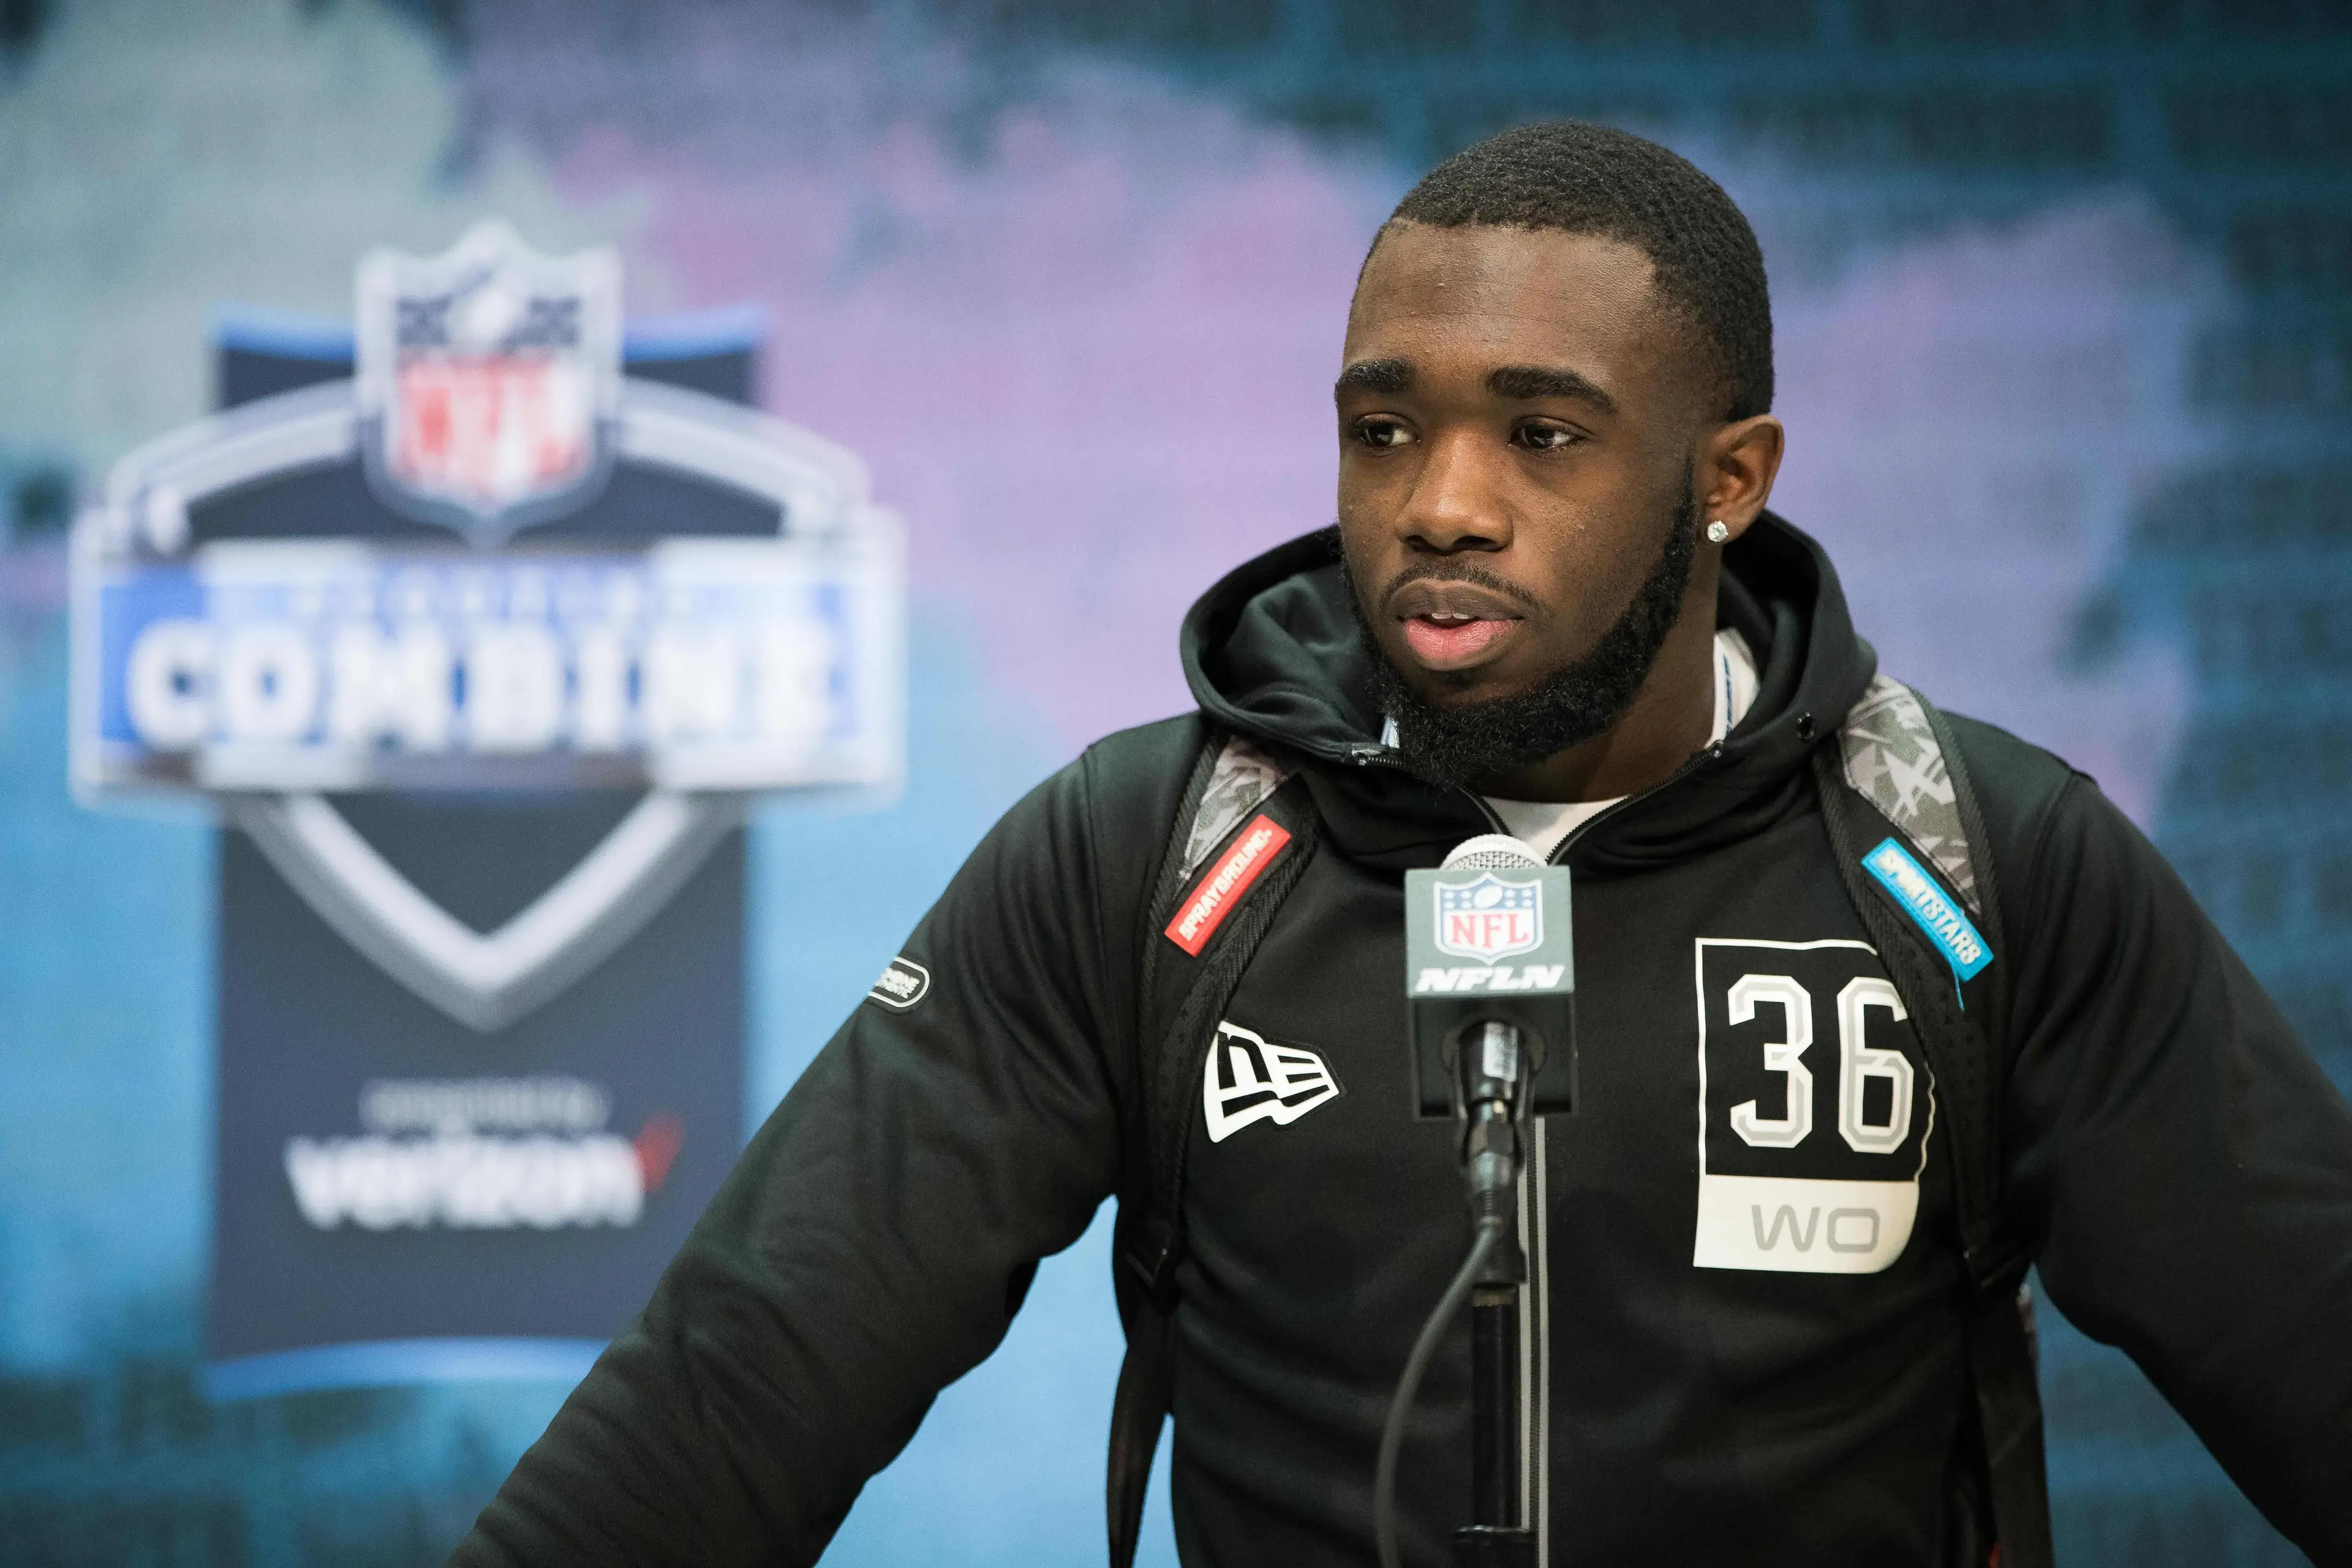 Feb 25, 2020; Indianapolis, Indiana, USA; Baylor wide receiver Denzel Mims (WO36) speaks to the media during the 2020 NFL Combine in the Indianapolis Convention Center. / Trevor Ruszkowski-USA TODAY Sports